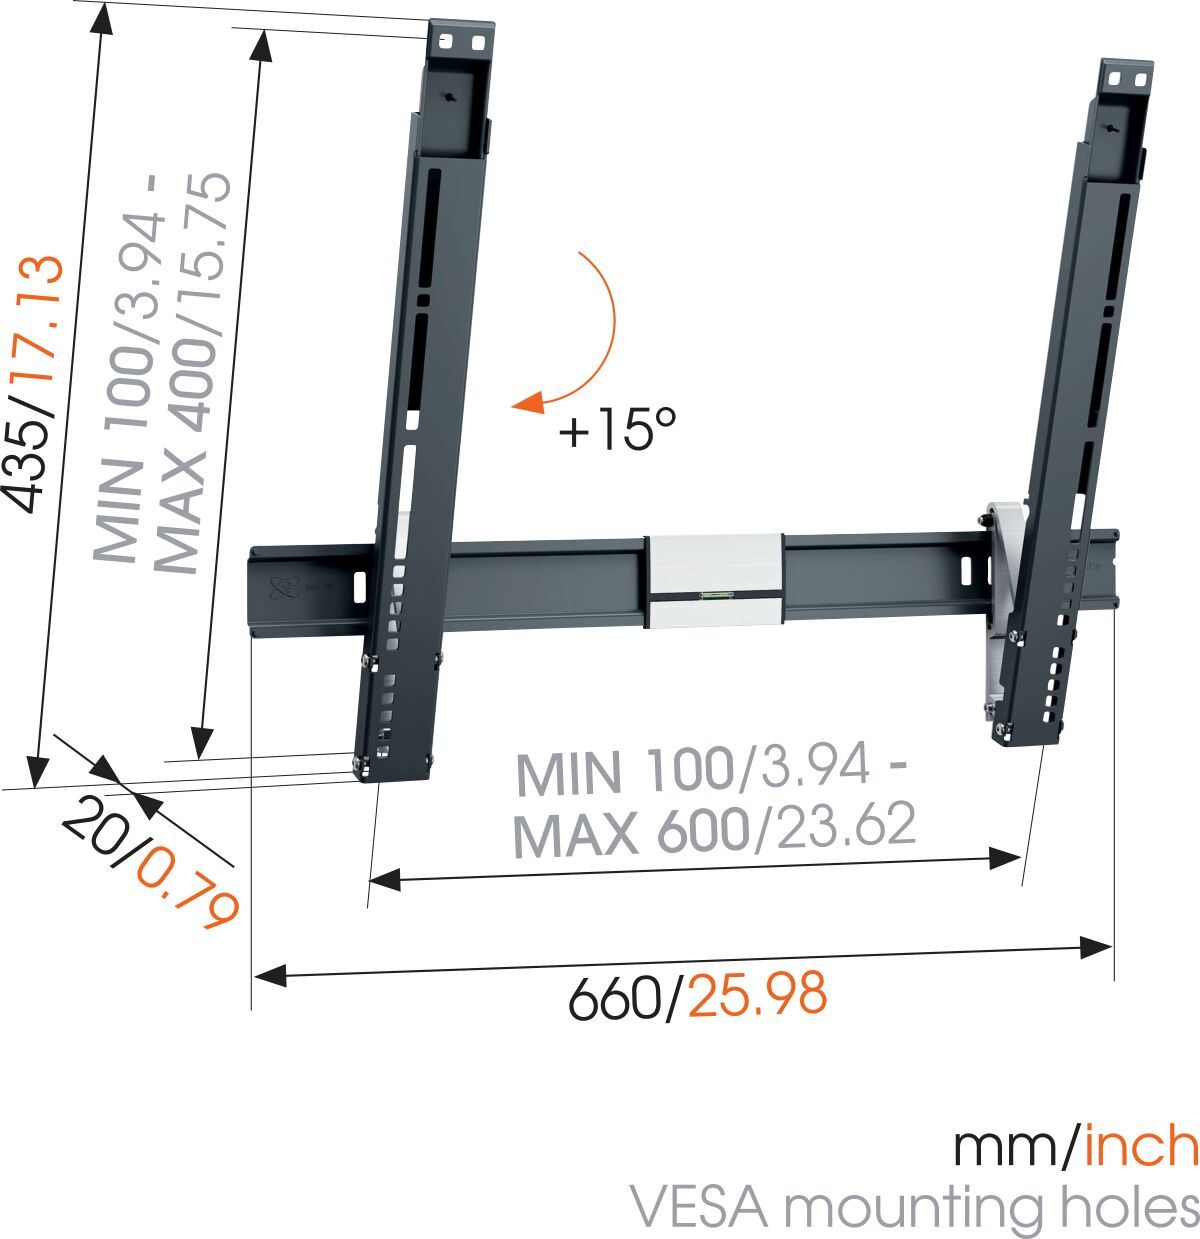 Vogel's THIN 515 ExtraThin Tilting TV Wall Mount - Suitable for 40 up to 65 inch TVs up to 25 kg - Tilt up to 15° - Dimensions